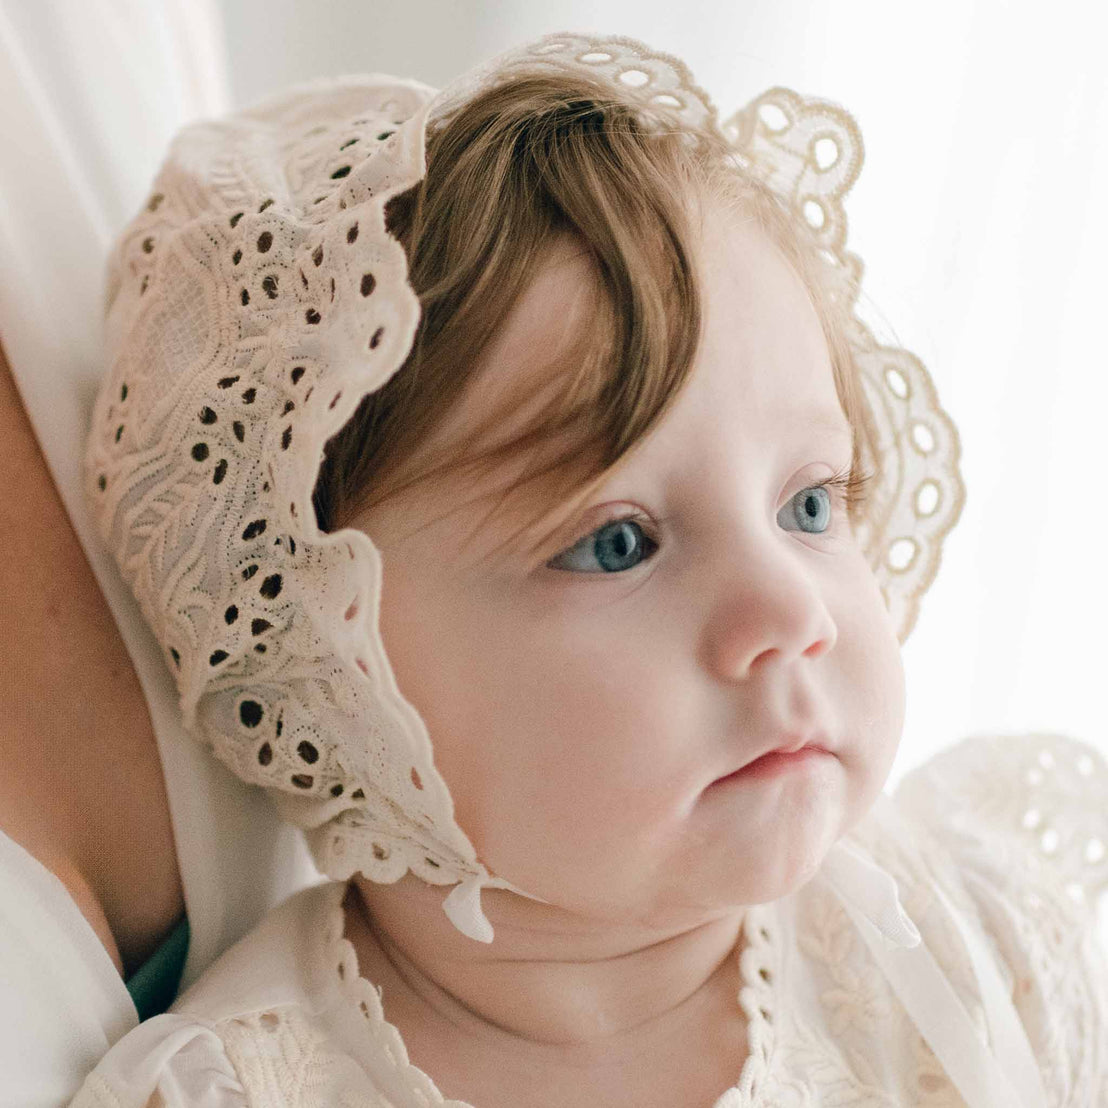 Baby wearing the Ingrid Lace Bonnet crafted with a 100% cotton lace in light ivory and a natural champagne tone